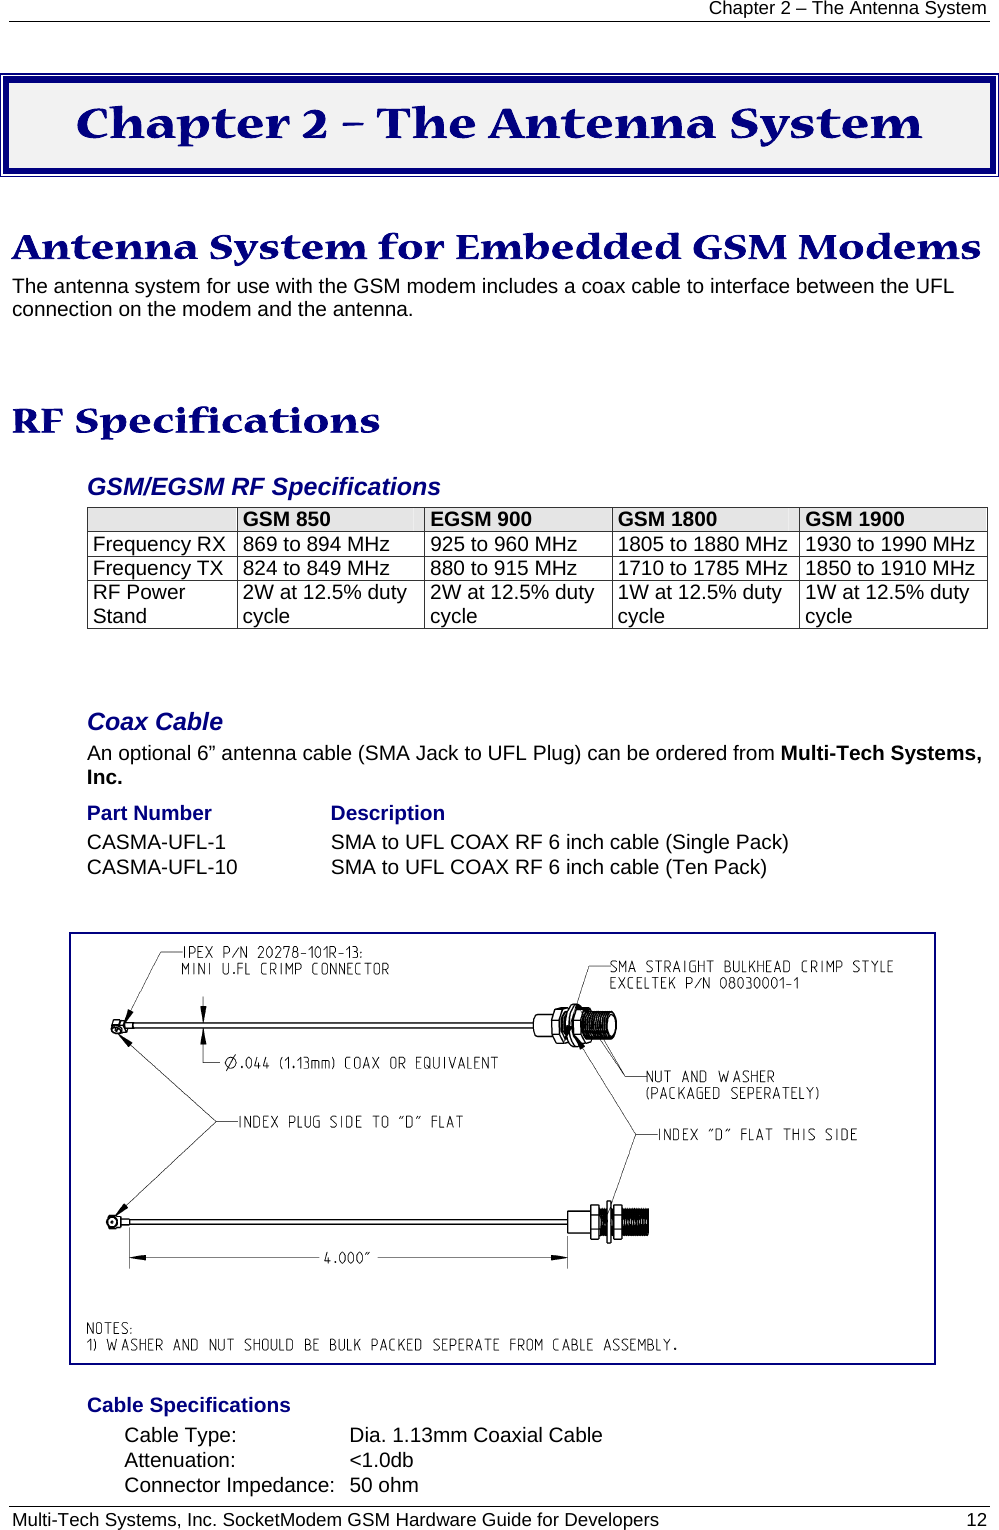 Chapter 2 – The Antenna System Multi-Tech Systems, Inc. SocketModem GSM Hardware Guide for Developers   12  Chapter 2 – The Antenna System  Antenna System for Embedded GSM Modems The antenna system for use with the GSM modem includes a coax cable to interface between the UFL connection on the modem and the antenna.   RF Specifications GSM/EGSM RF Specifications GSM 850  EGSM 900  GSM 1800  GSM 1900 Frequency RX  869 to 894 MHz  925 to 960 MHz  1805 to 1880 MHz  1930 to 1990 MHzFrequency TX  824 to 849 MHz  880 to 915 MHz  1710 to 1785 MHz  1850 to 1910 MHzRF Power Stand  2W at 12.5% duty cycle  2W at 12.5% duty cycle  1W at 12.5% duty cycle  1W at 12.5% duty cycle   Coax Cable An optional 6” antenna cable (SMA Jack to UFL Plug) can be ordered from Multi-Tech Systems, Inc.  Part Number  Description CASMA-UFL-1   SMA to UFL COAX RF 6 inch cable (Single Pack) CASMA-UFL-10   SMA to UFL COAX RF 6 inch cable (Ten Pack)     Cable Specifications Cable Type:  Dia. 1.13mm Coaxial Cable Attenuation: &lt;1.0db Connector Impedance:  50 ohm 